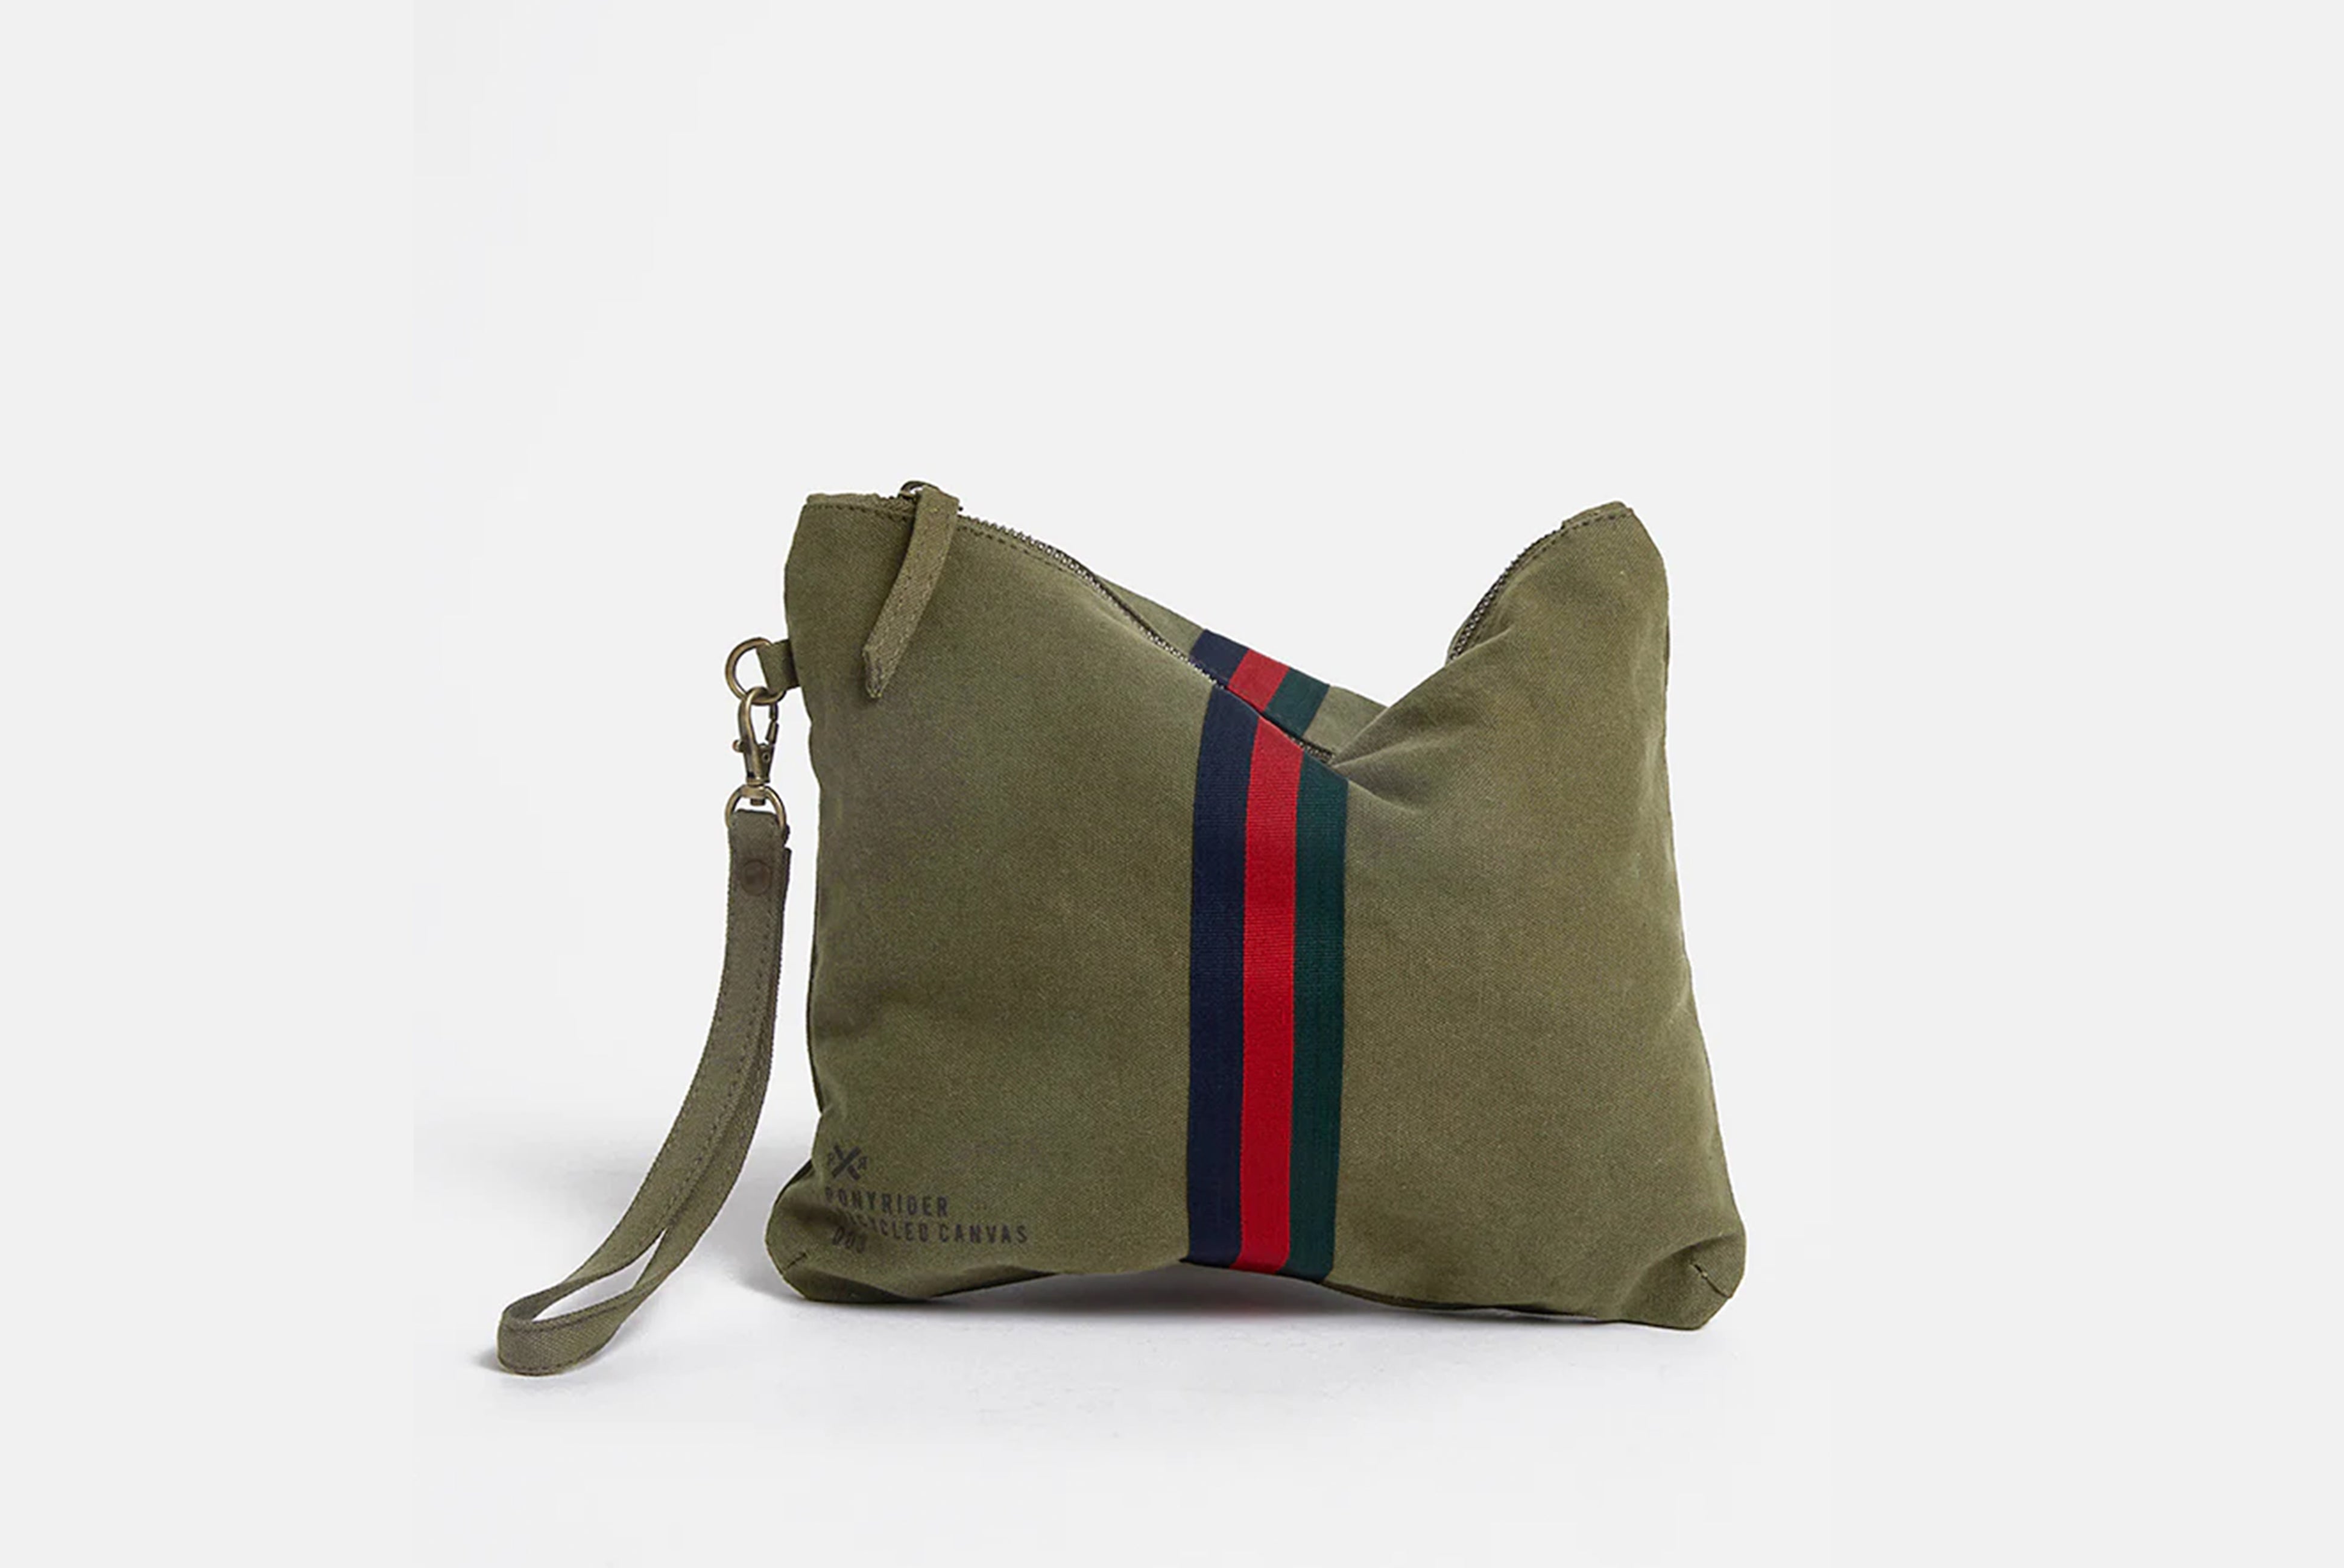 Escapee Pouch by Pony Rider